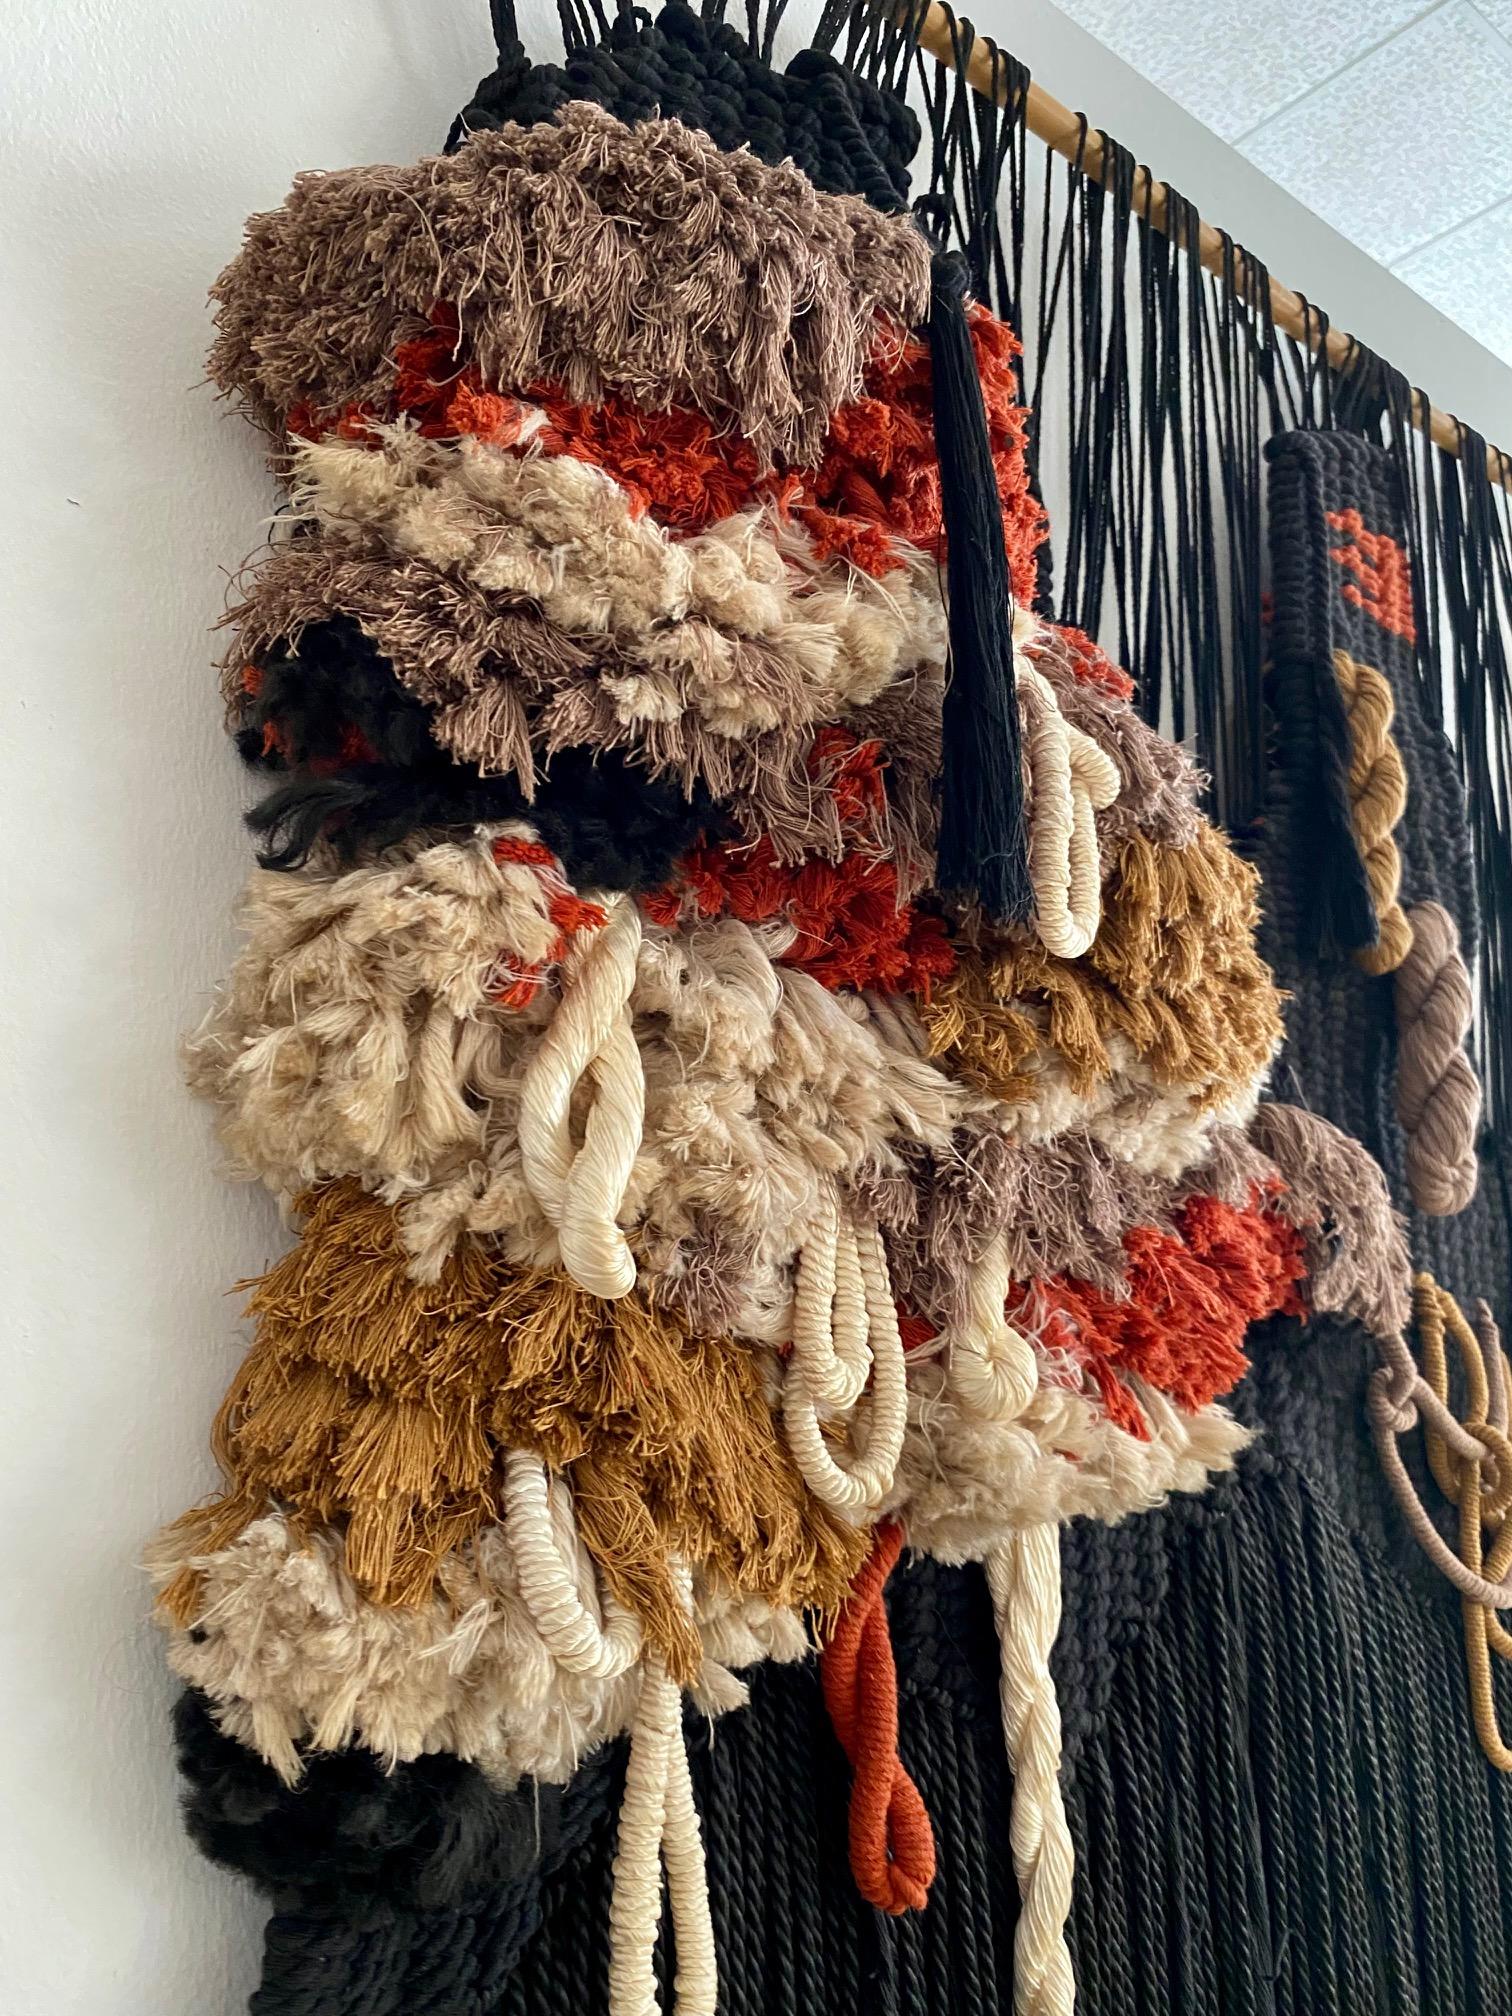 bohemian decor, macramé wall hangings should be at the top of your list. These lightweight, airy pieces are typically made with natural materials (think cotton cord and merino wool), and they create an instant boho-chic feel in any space.